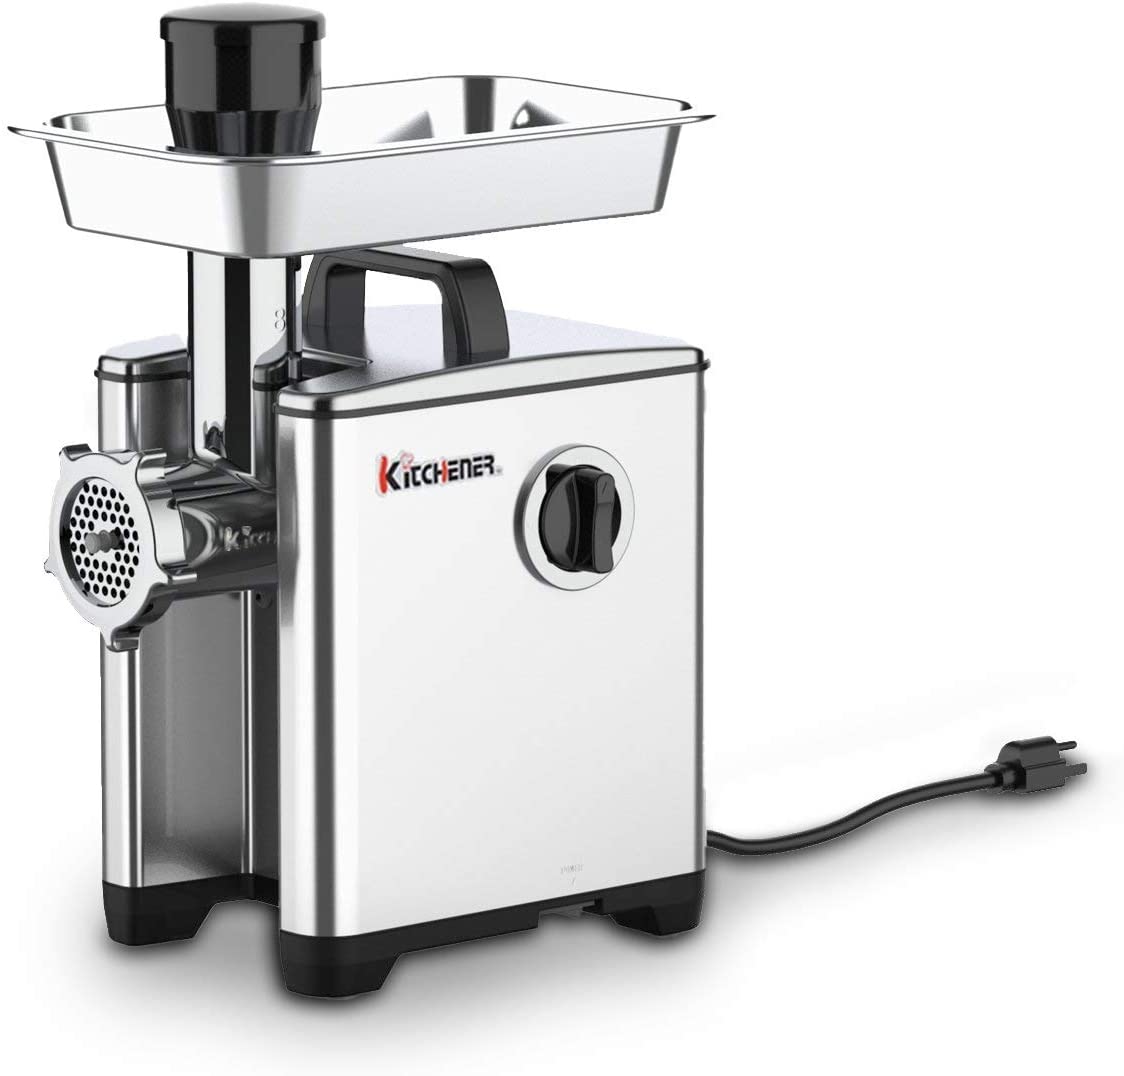 Kitchener - Heavy duty commercial grade stainless steel electric high HP meat grinder - # 8 240 lbs / hour